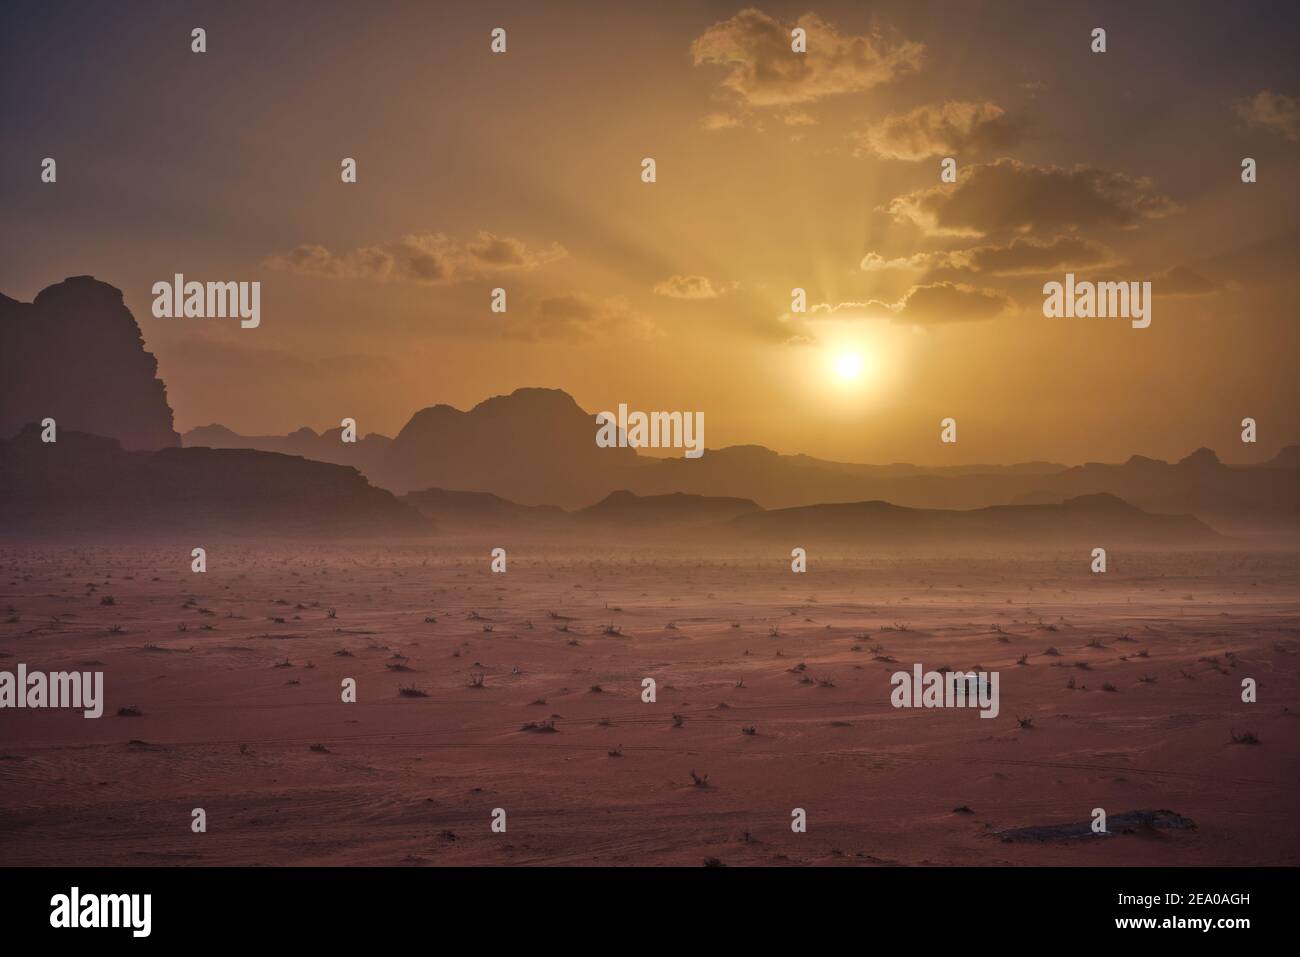 Photo of the landscape of the Wadi Rum Desert at the sunset time Stock Photo